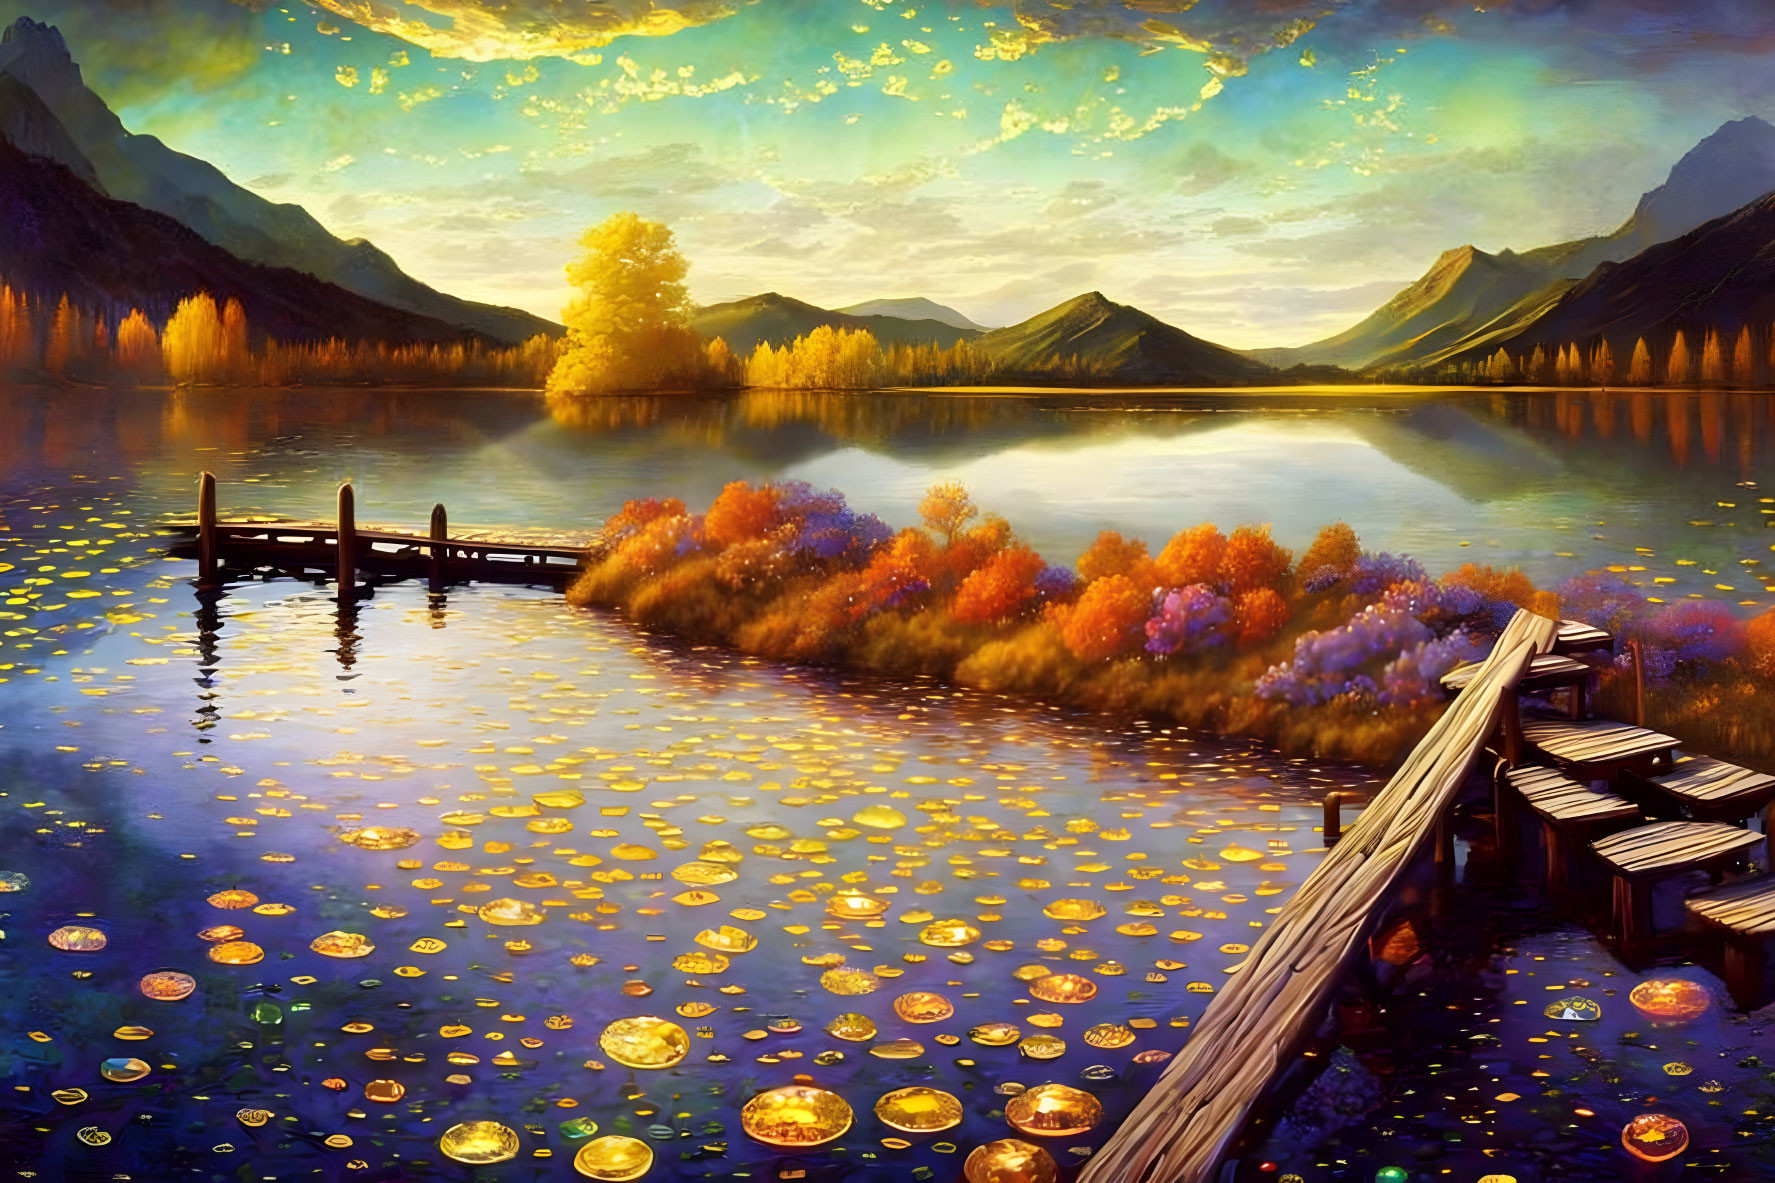 Scenic painting of calm lake with autumn foliage, wooden jetty, distant mountains, and golden reflections